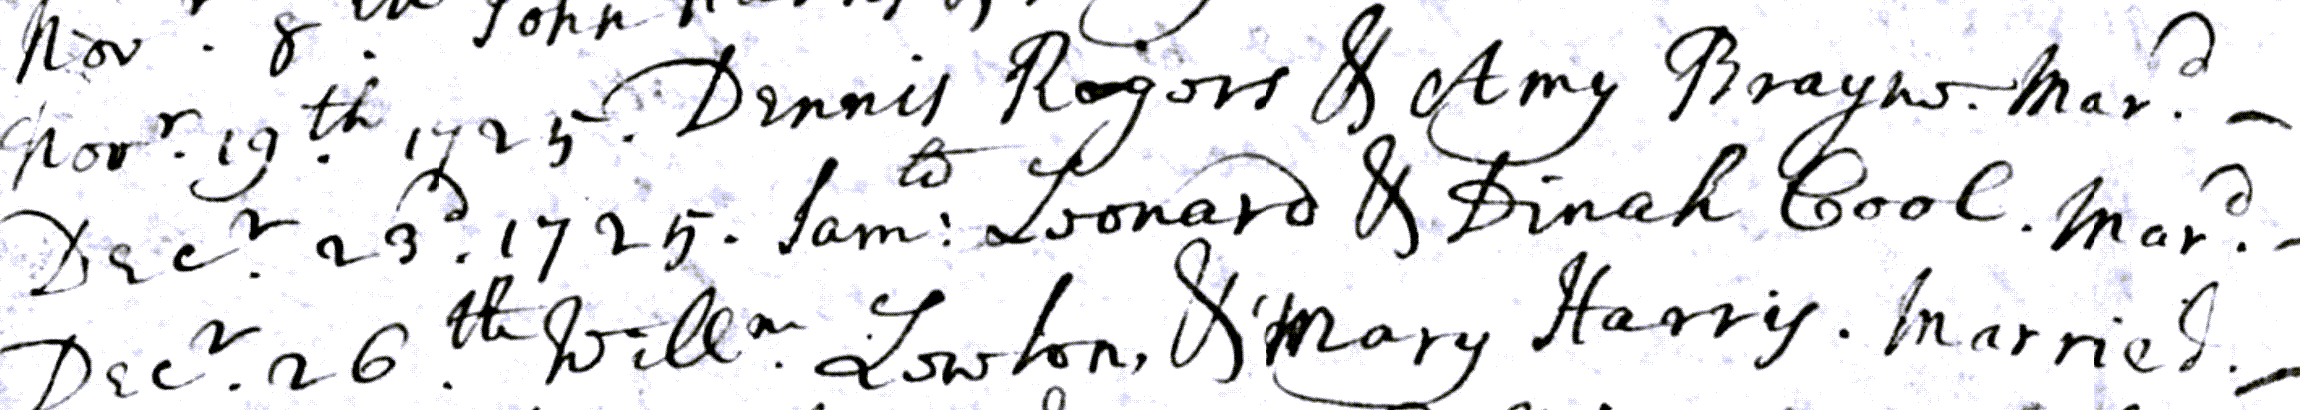 Figure 1: Marriage Register Entry for Samuel Leonard and Dinah Cool